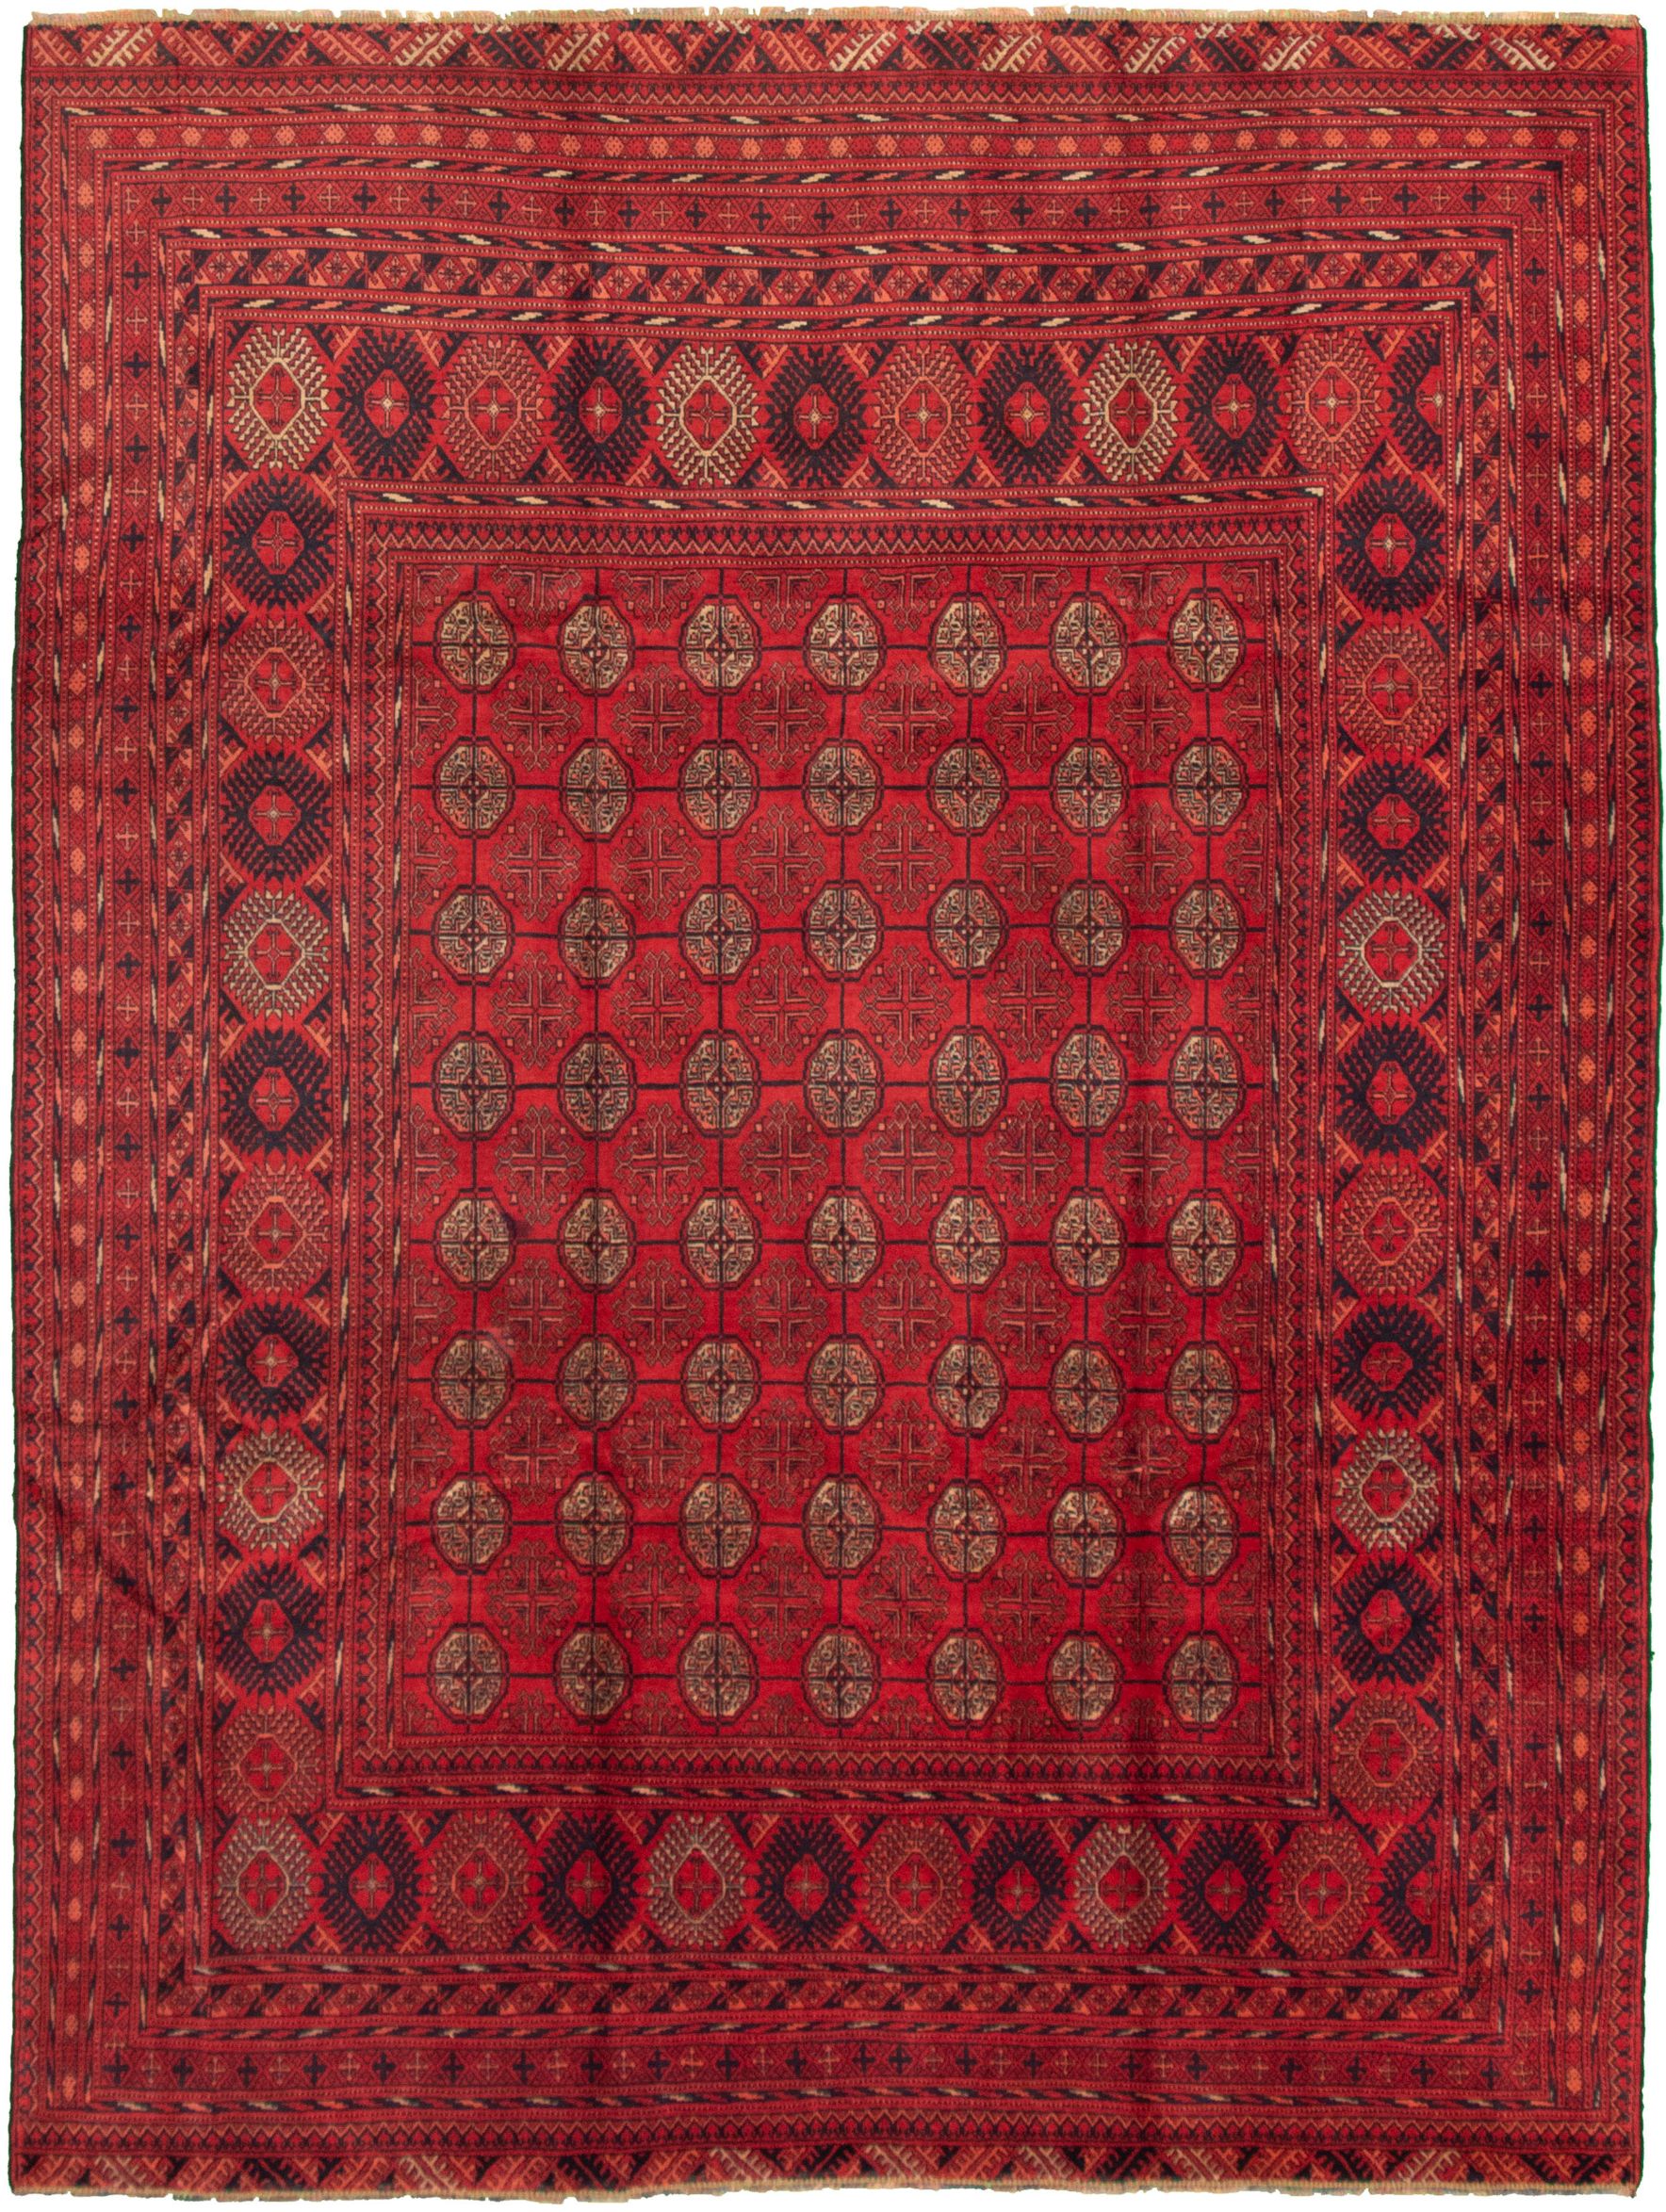 Hand-knotted Khal Mohammadi Red Wool Rug 6'6" x 9'0"  Size: 6'6" x 9'0"  